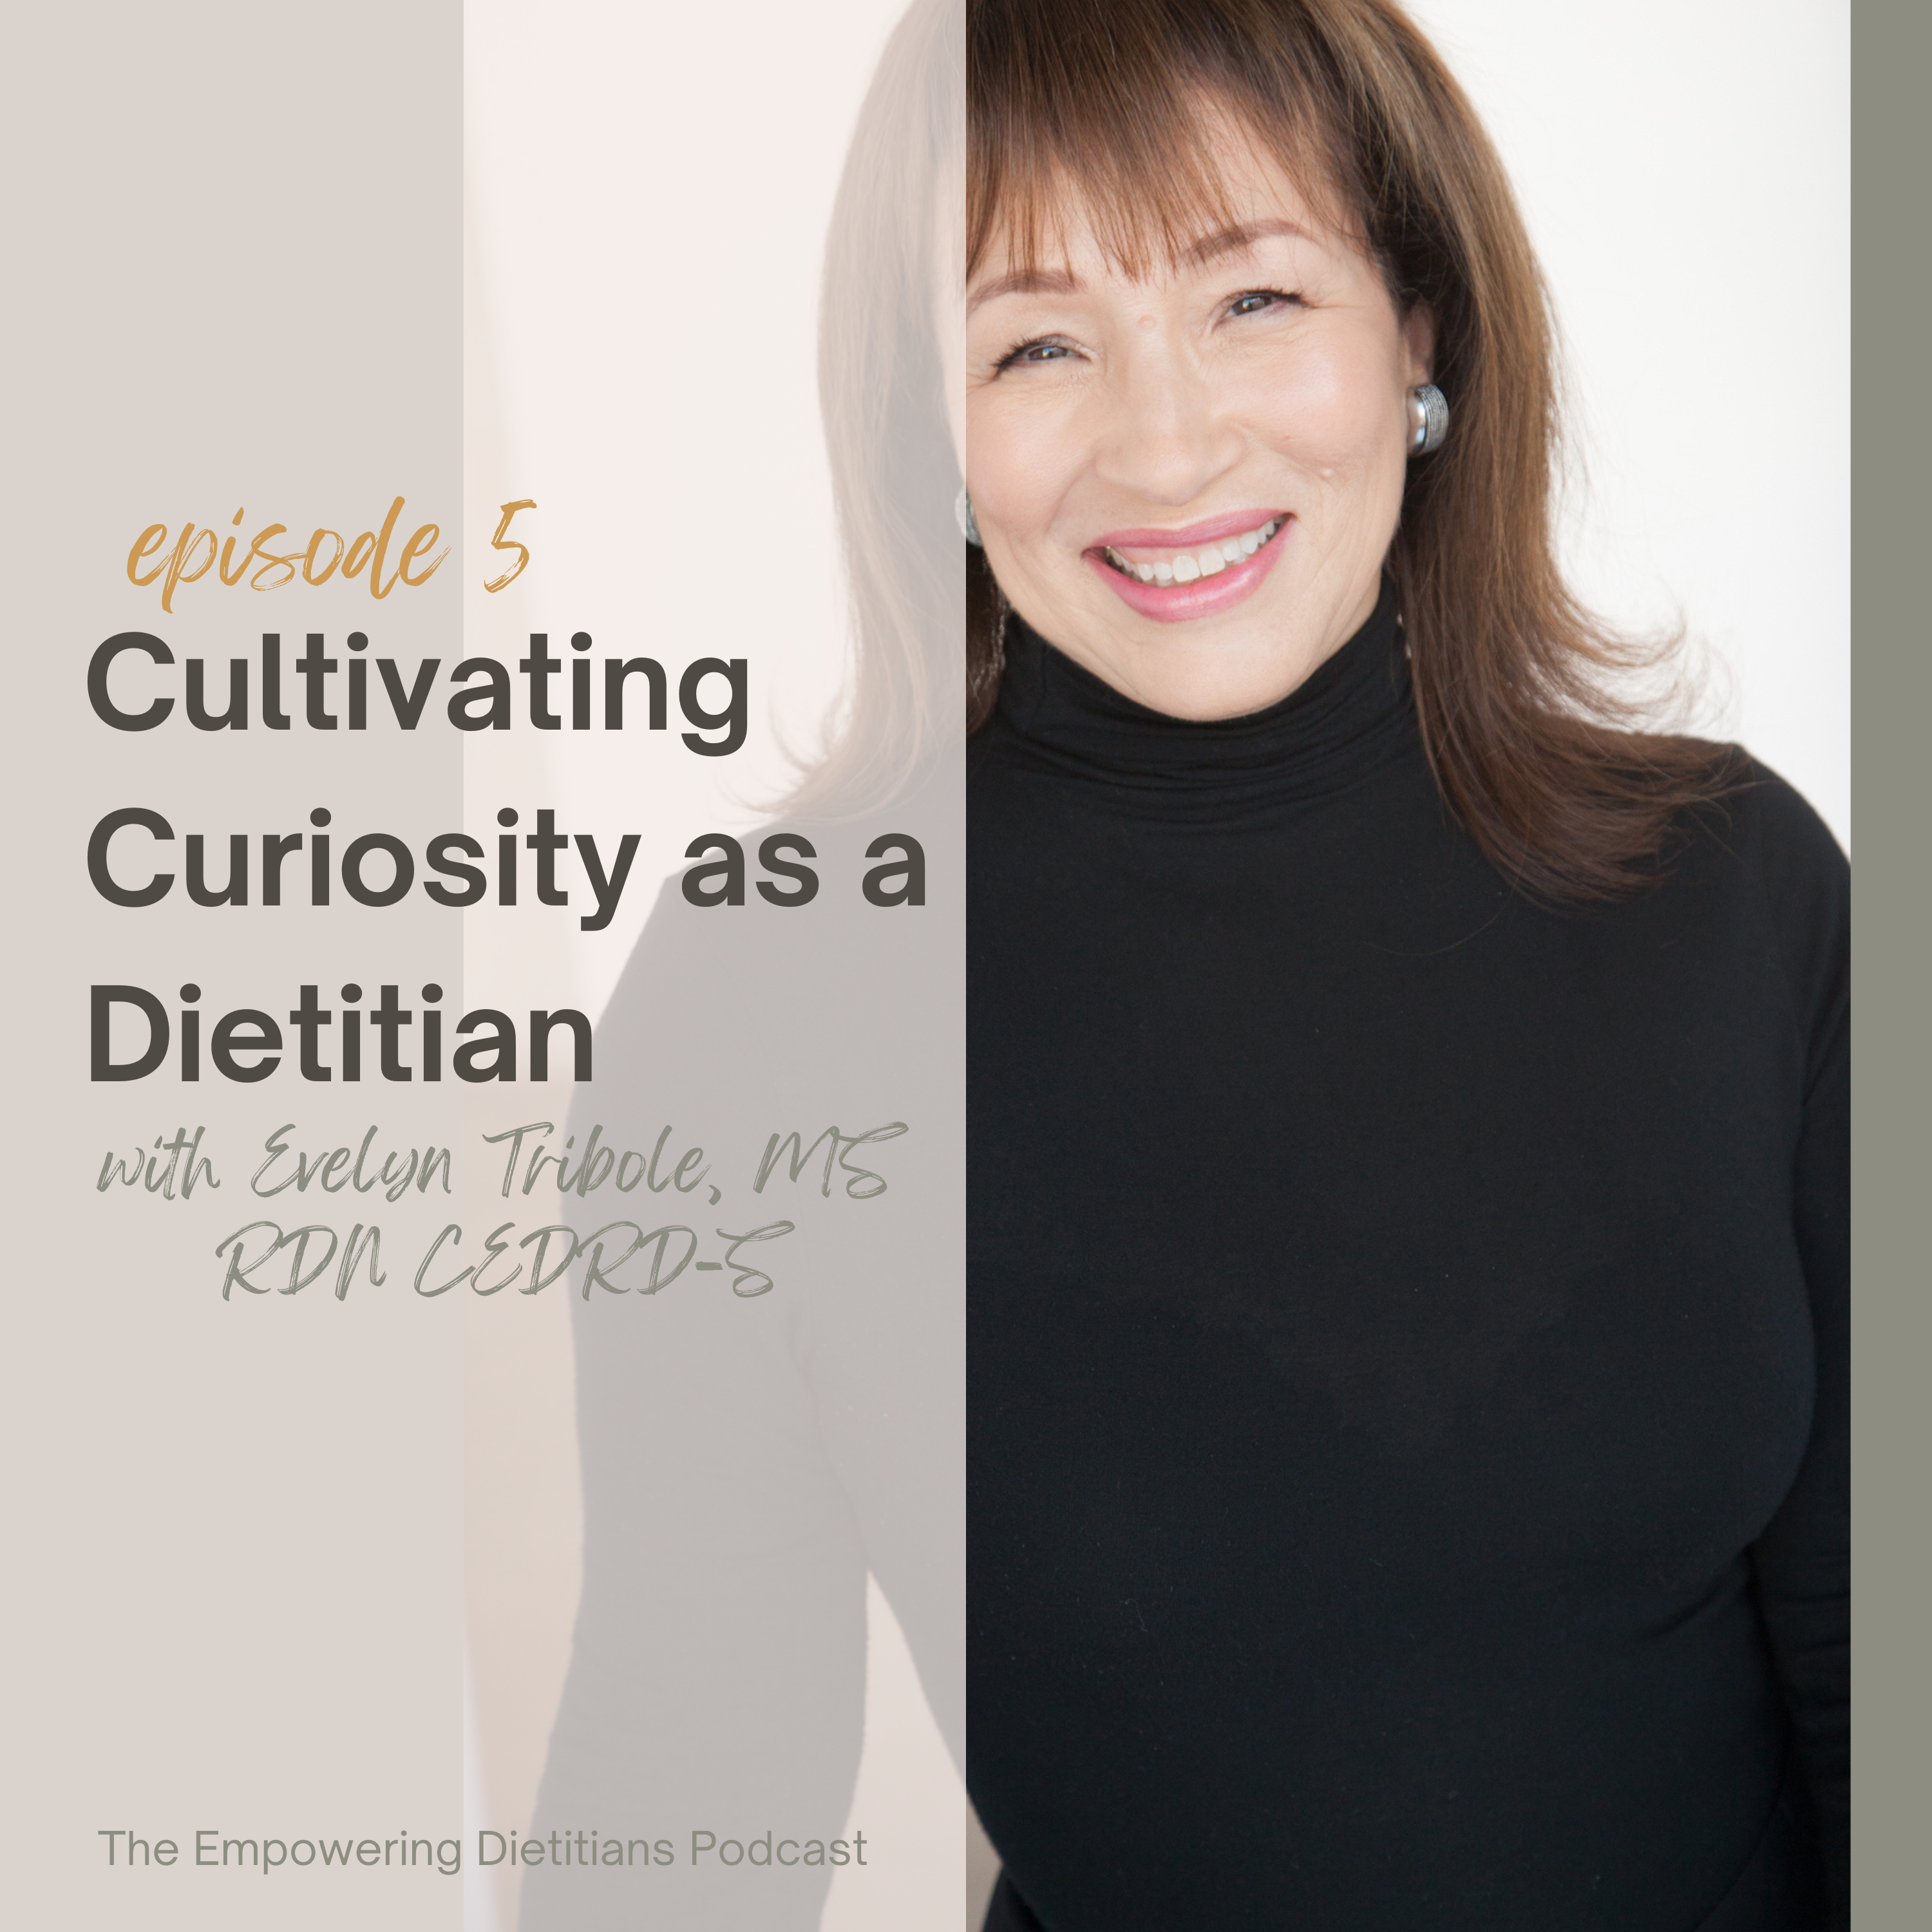 cultivating curiosity as a dietitian with evelyn tribole